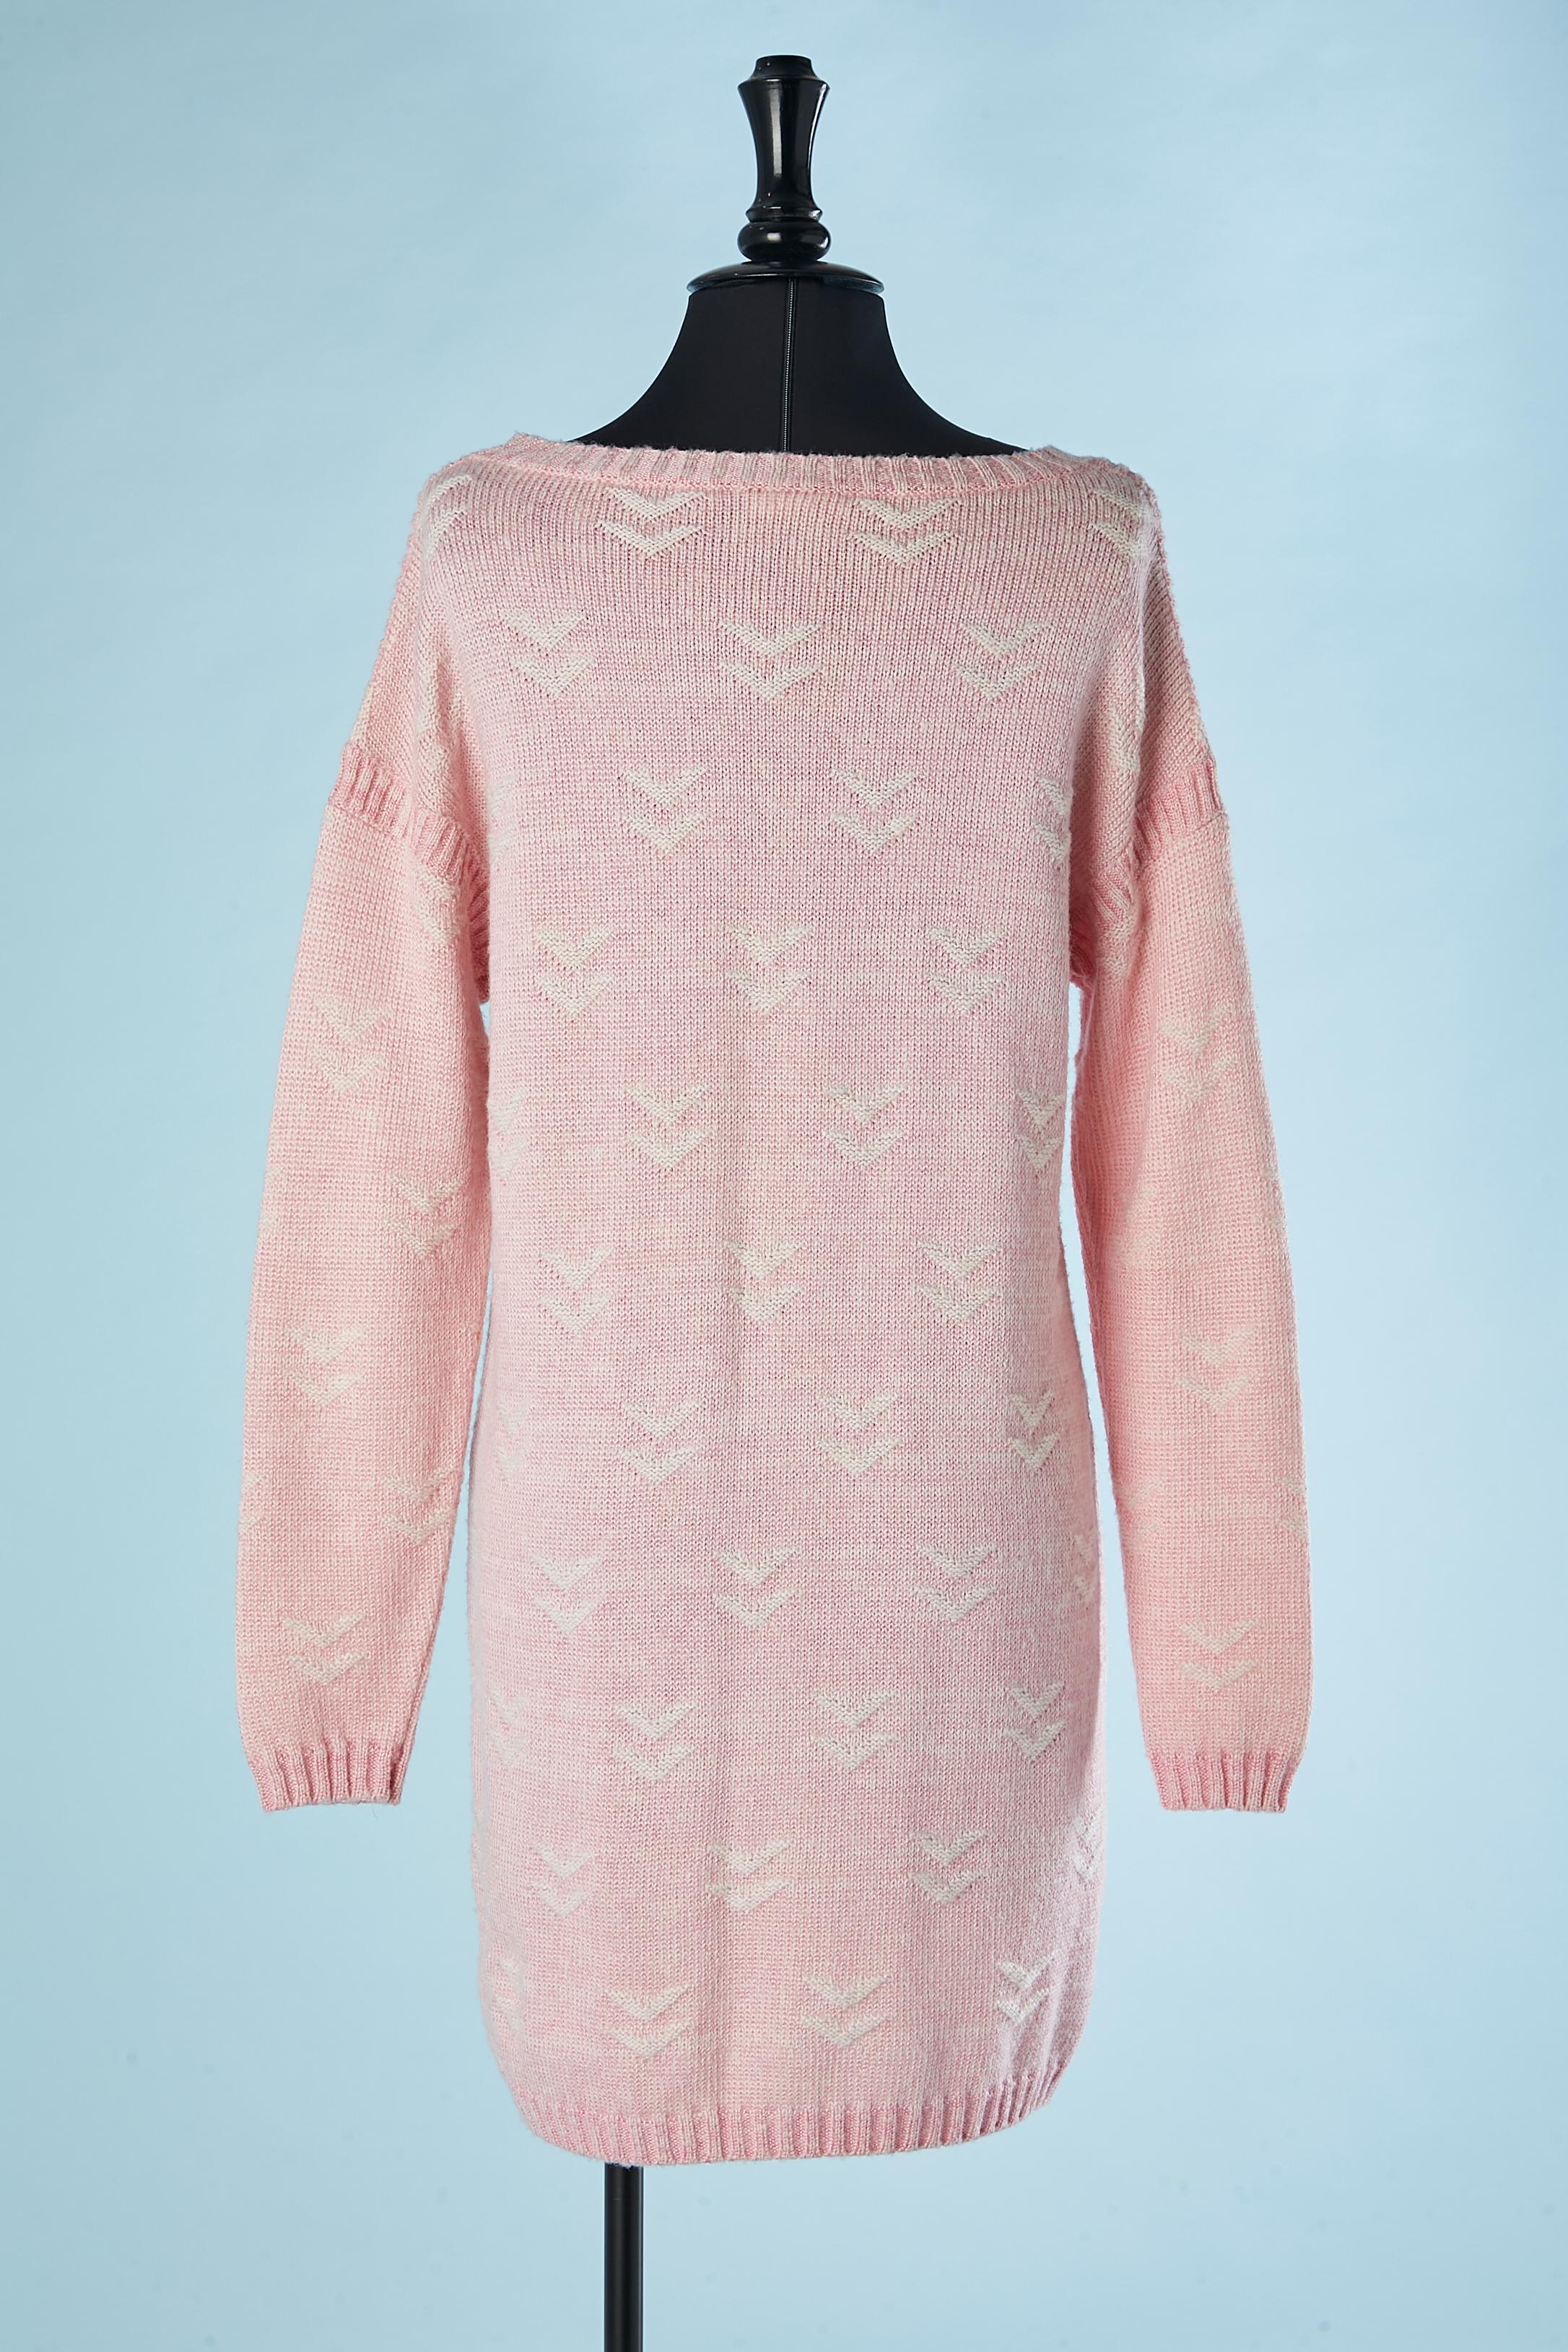 Pink and white jacquard knit dress with bird pattern Courrèges For Sale 1